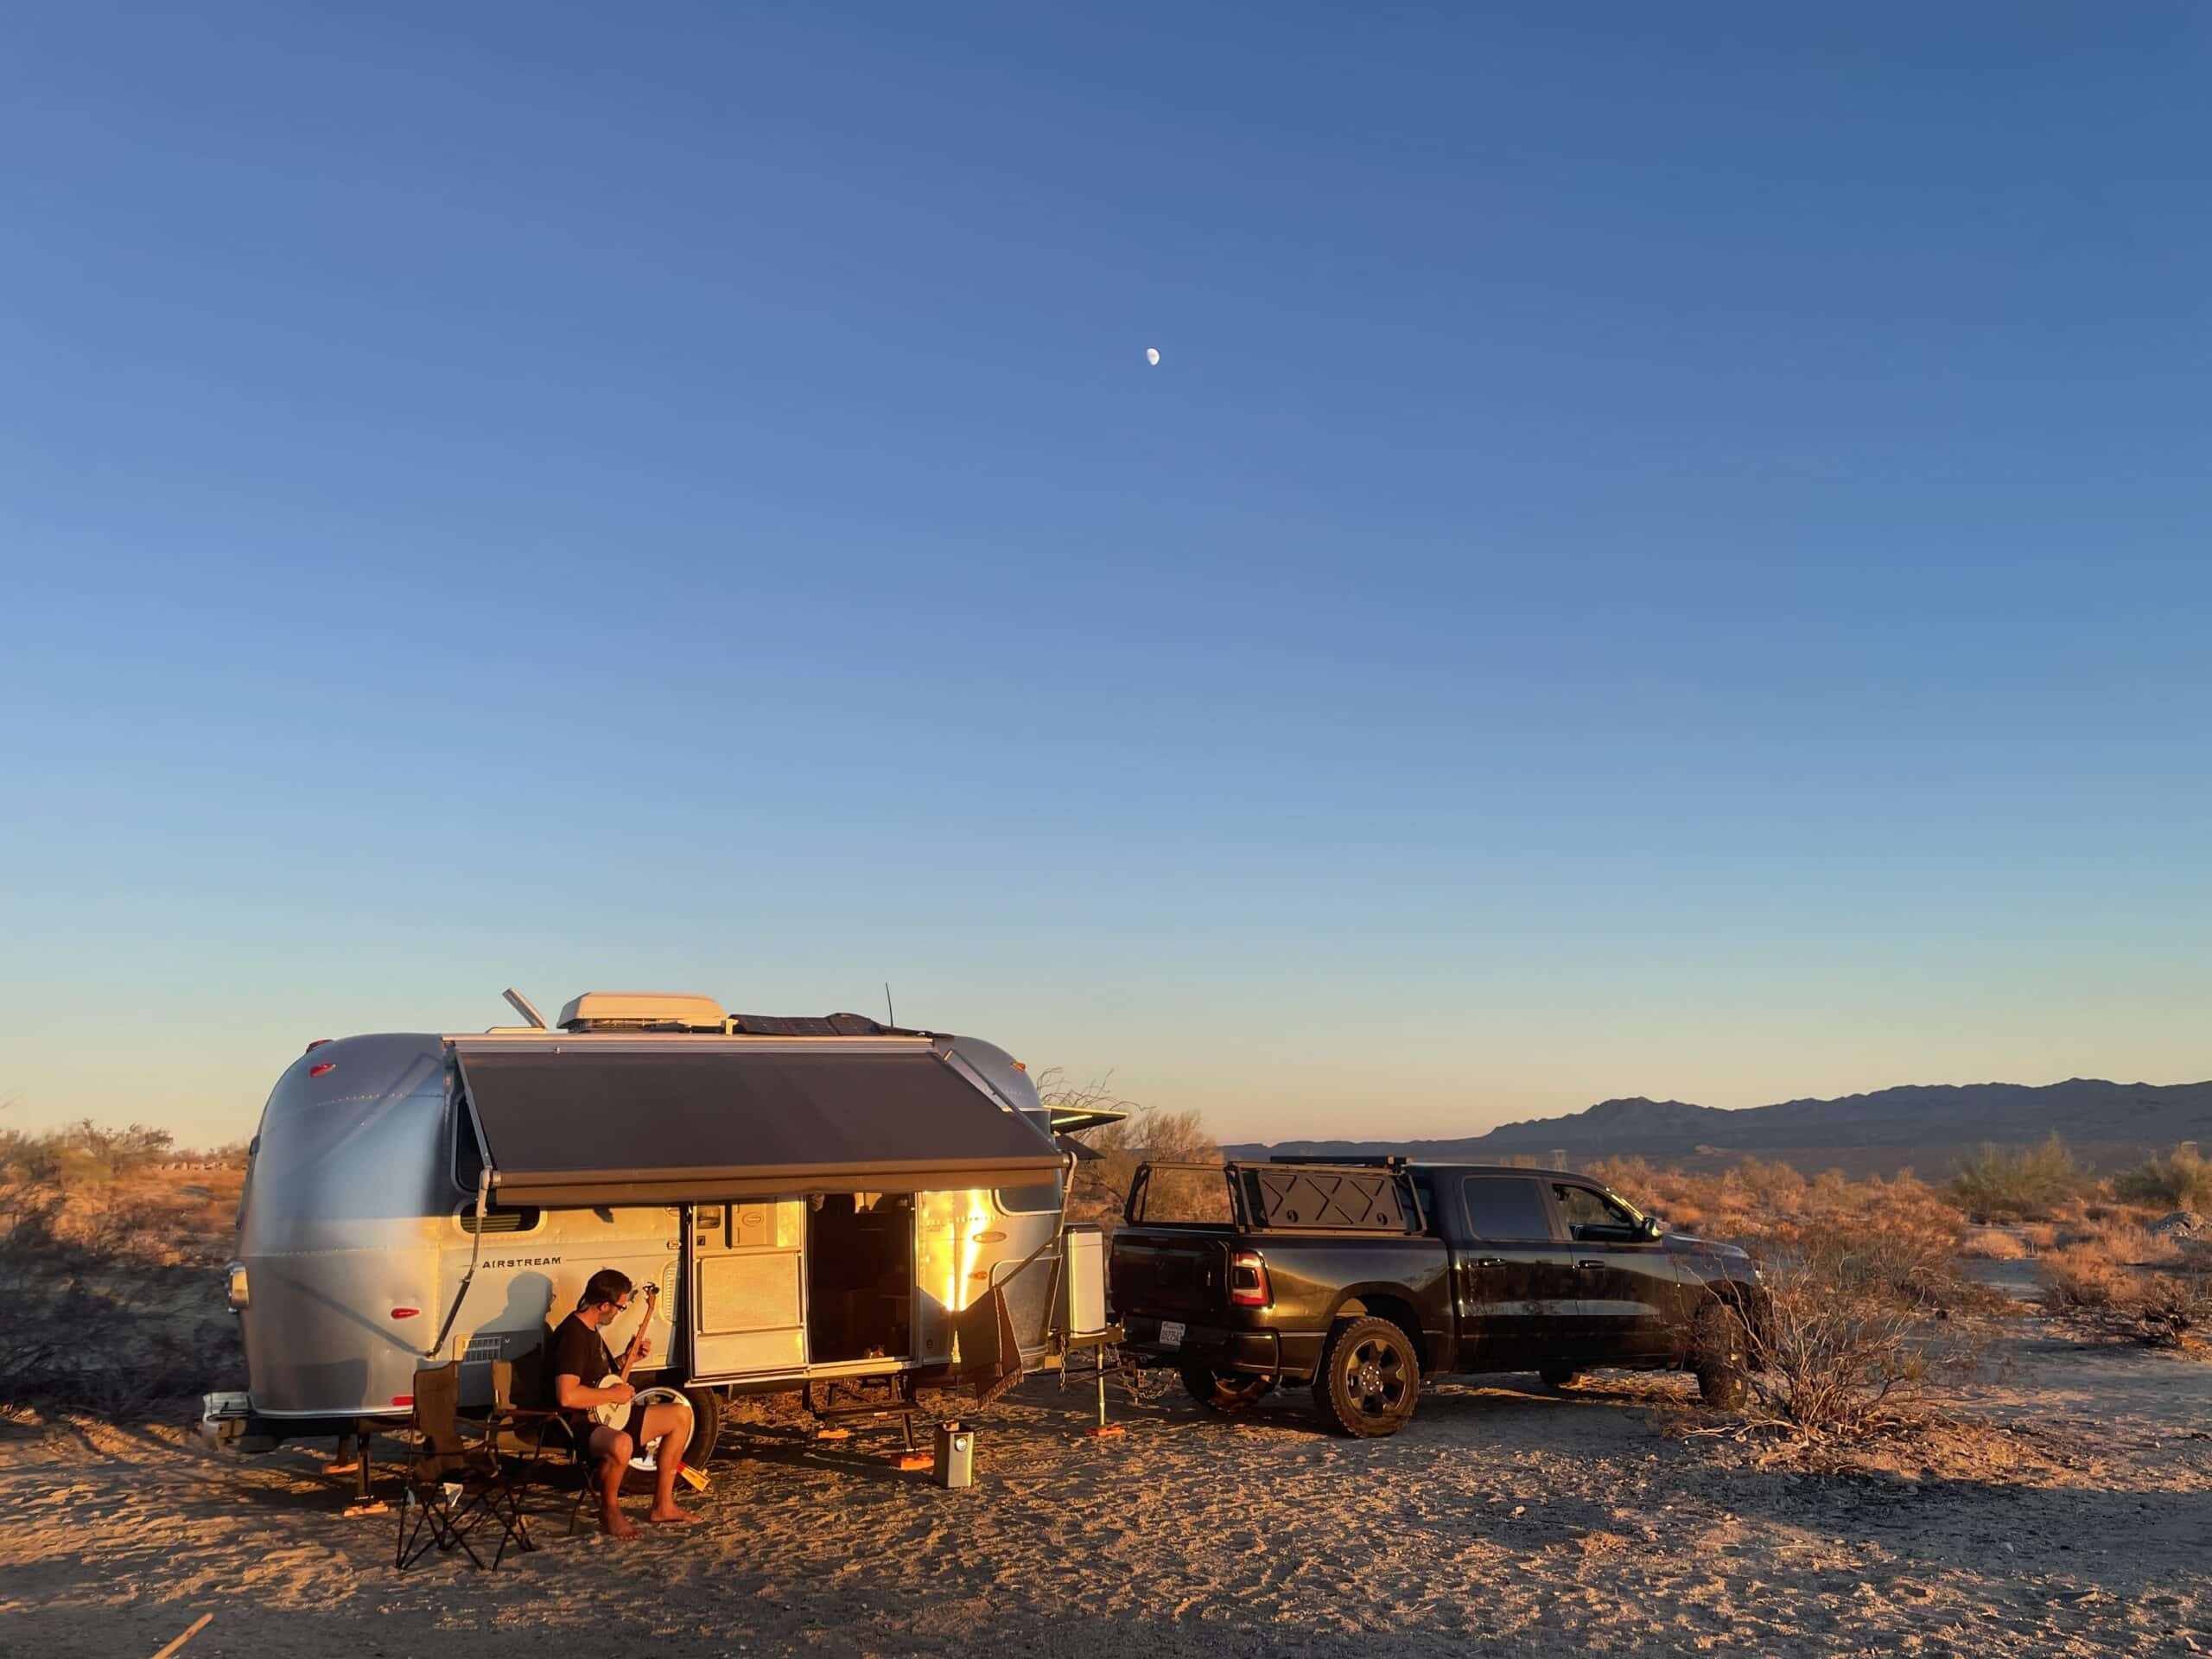 Playing Banjo by the Airstream